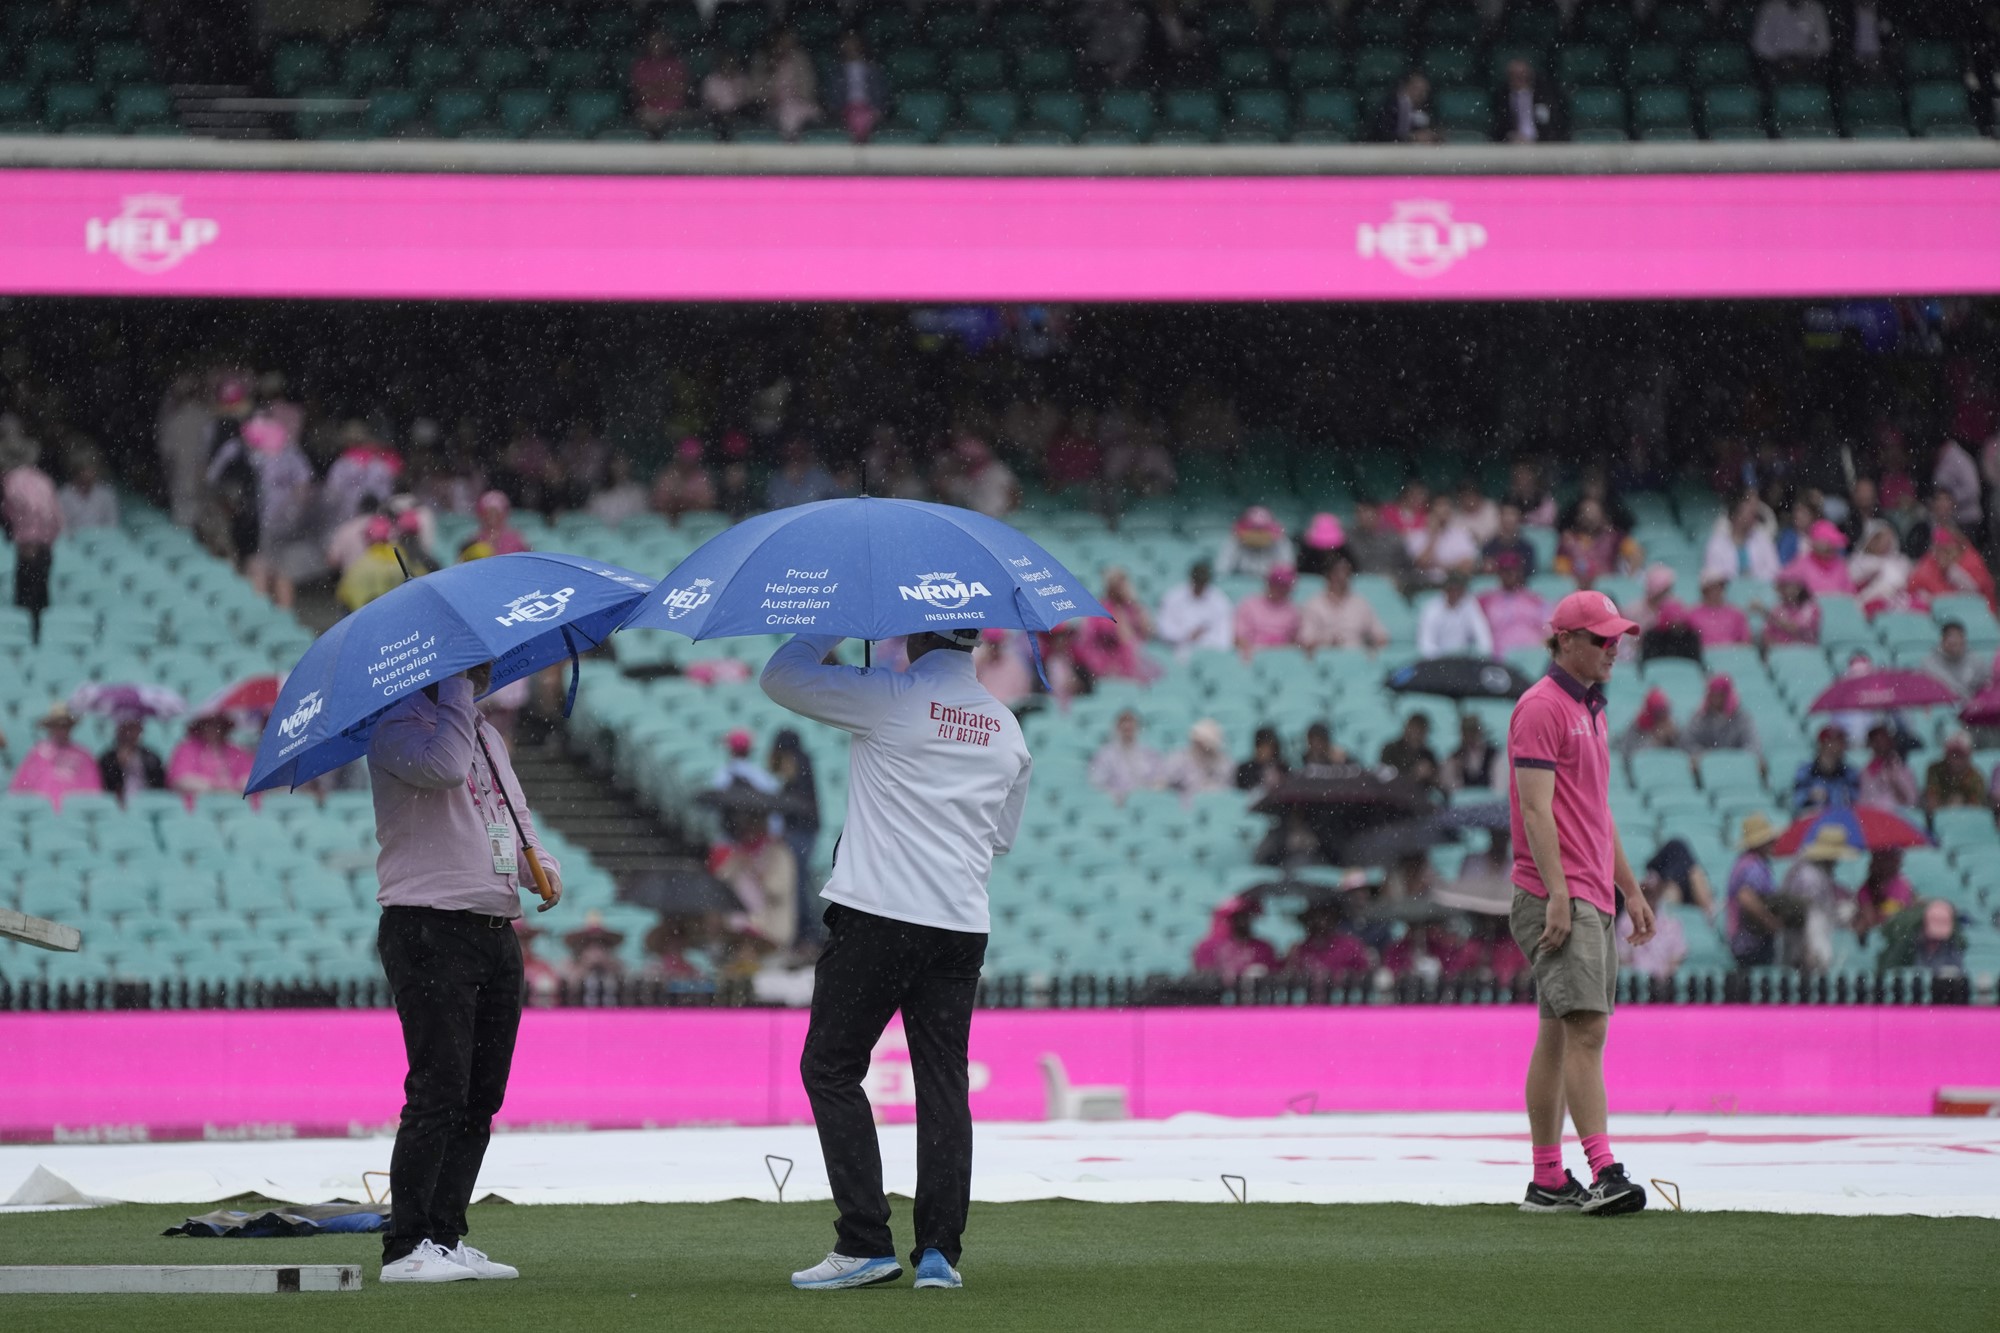 Umpires stand under umbrellas at the SCG where the pitch is covered.